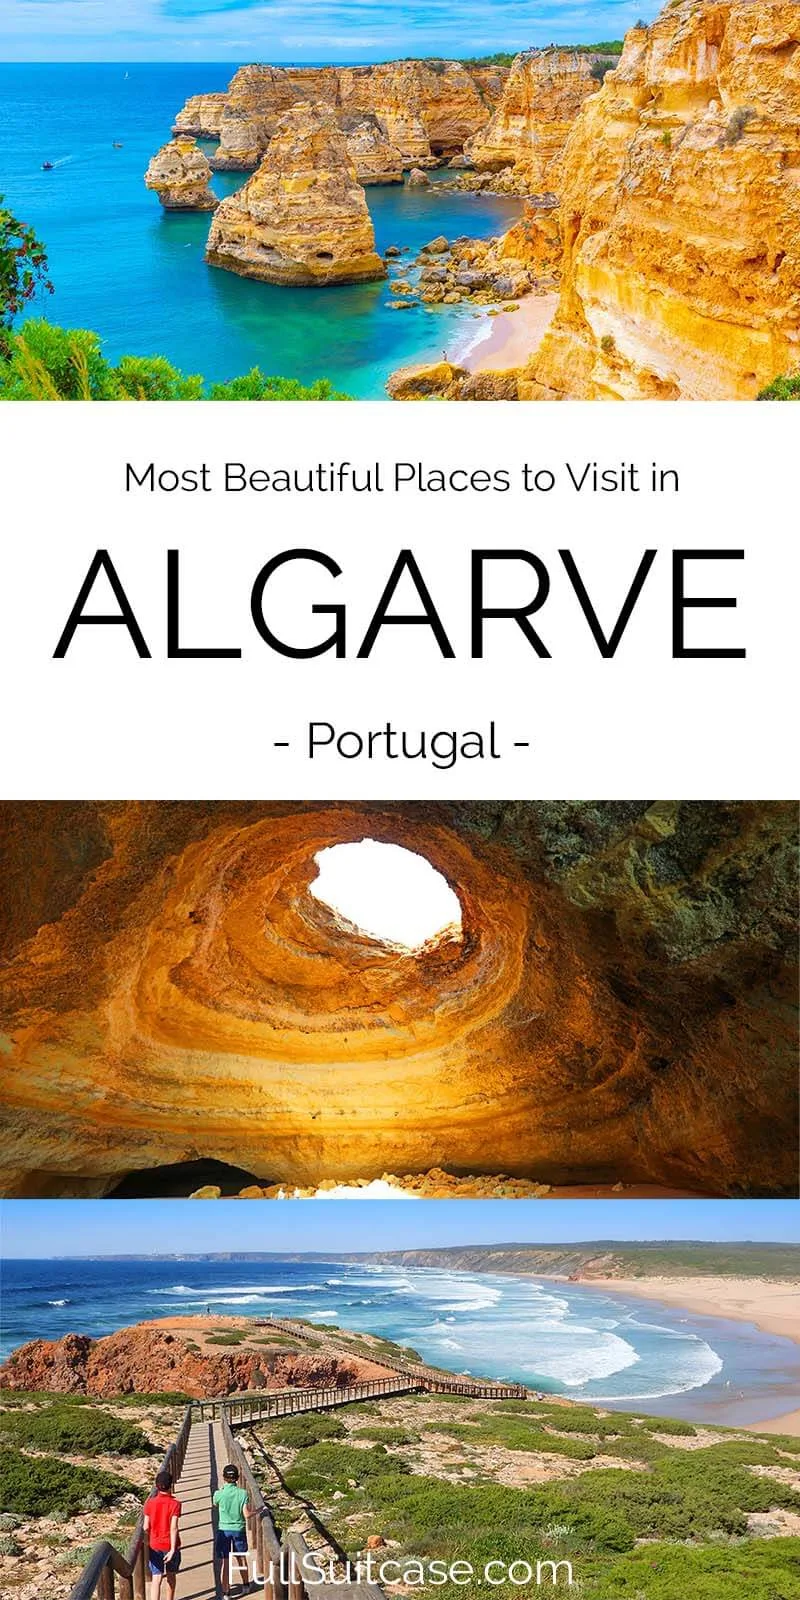 Most beautiful places to visit in Algarve Portugal